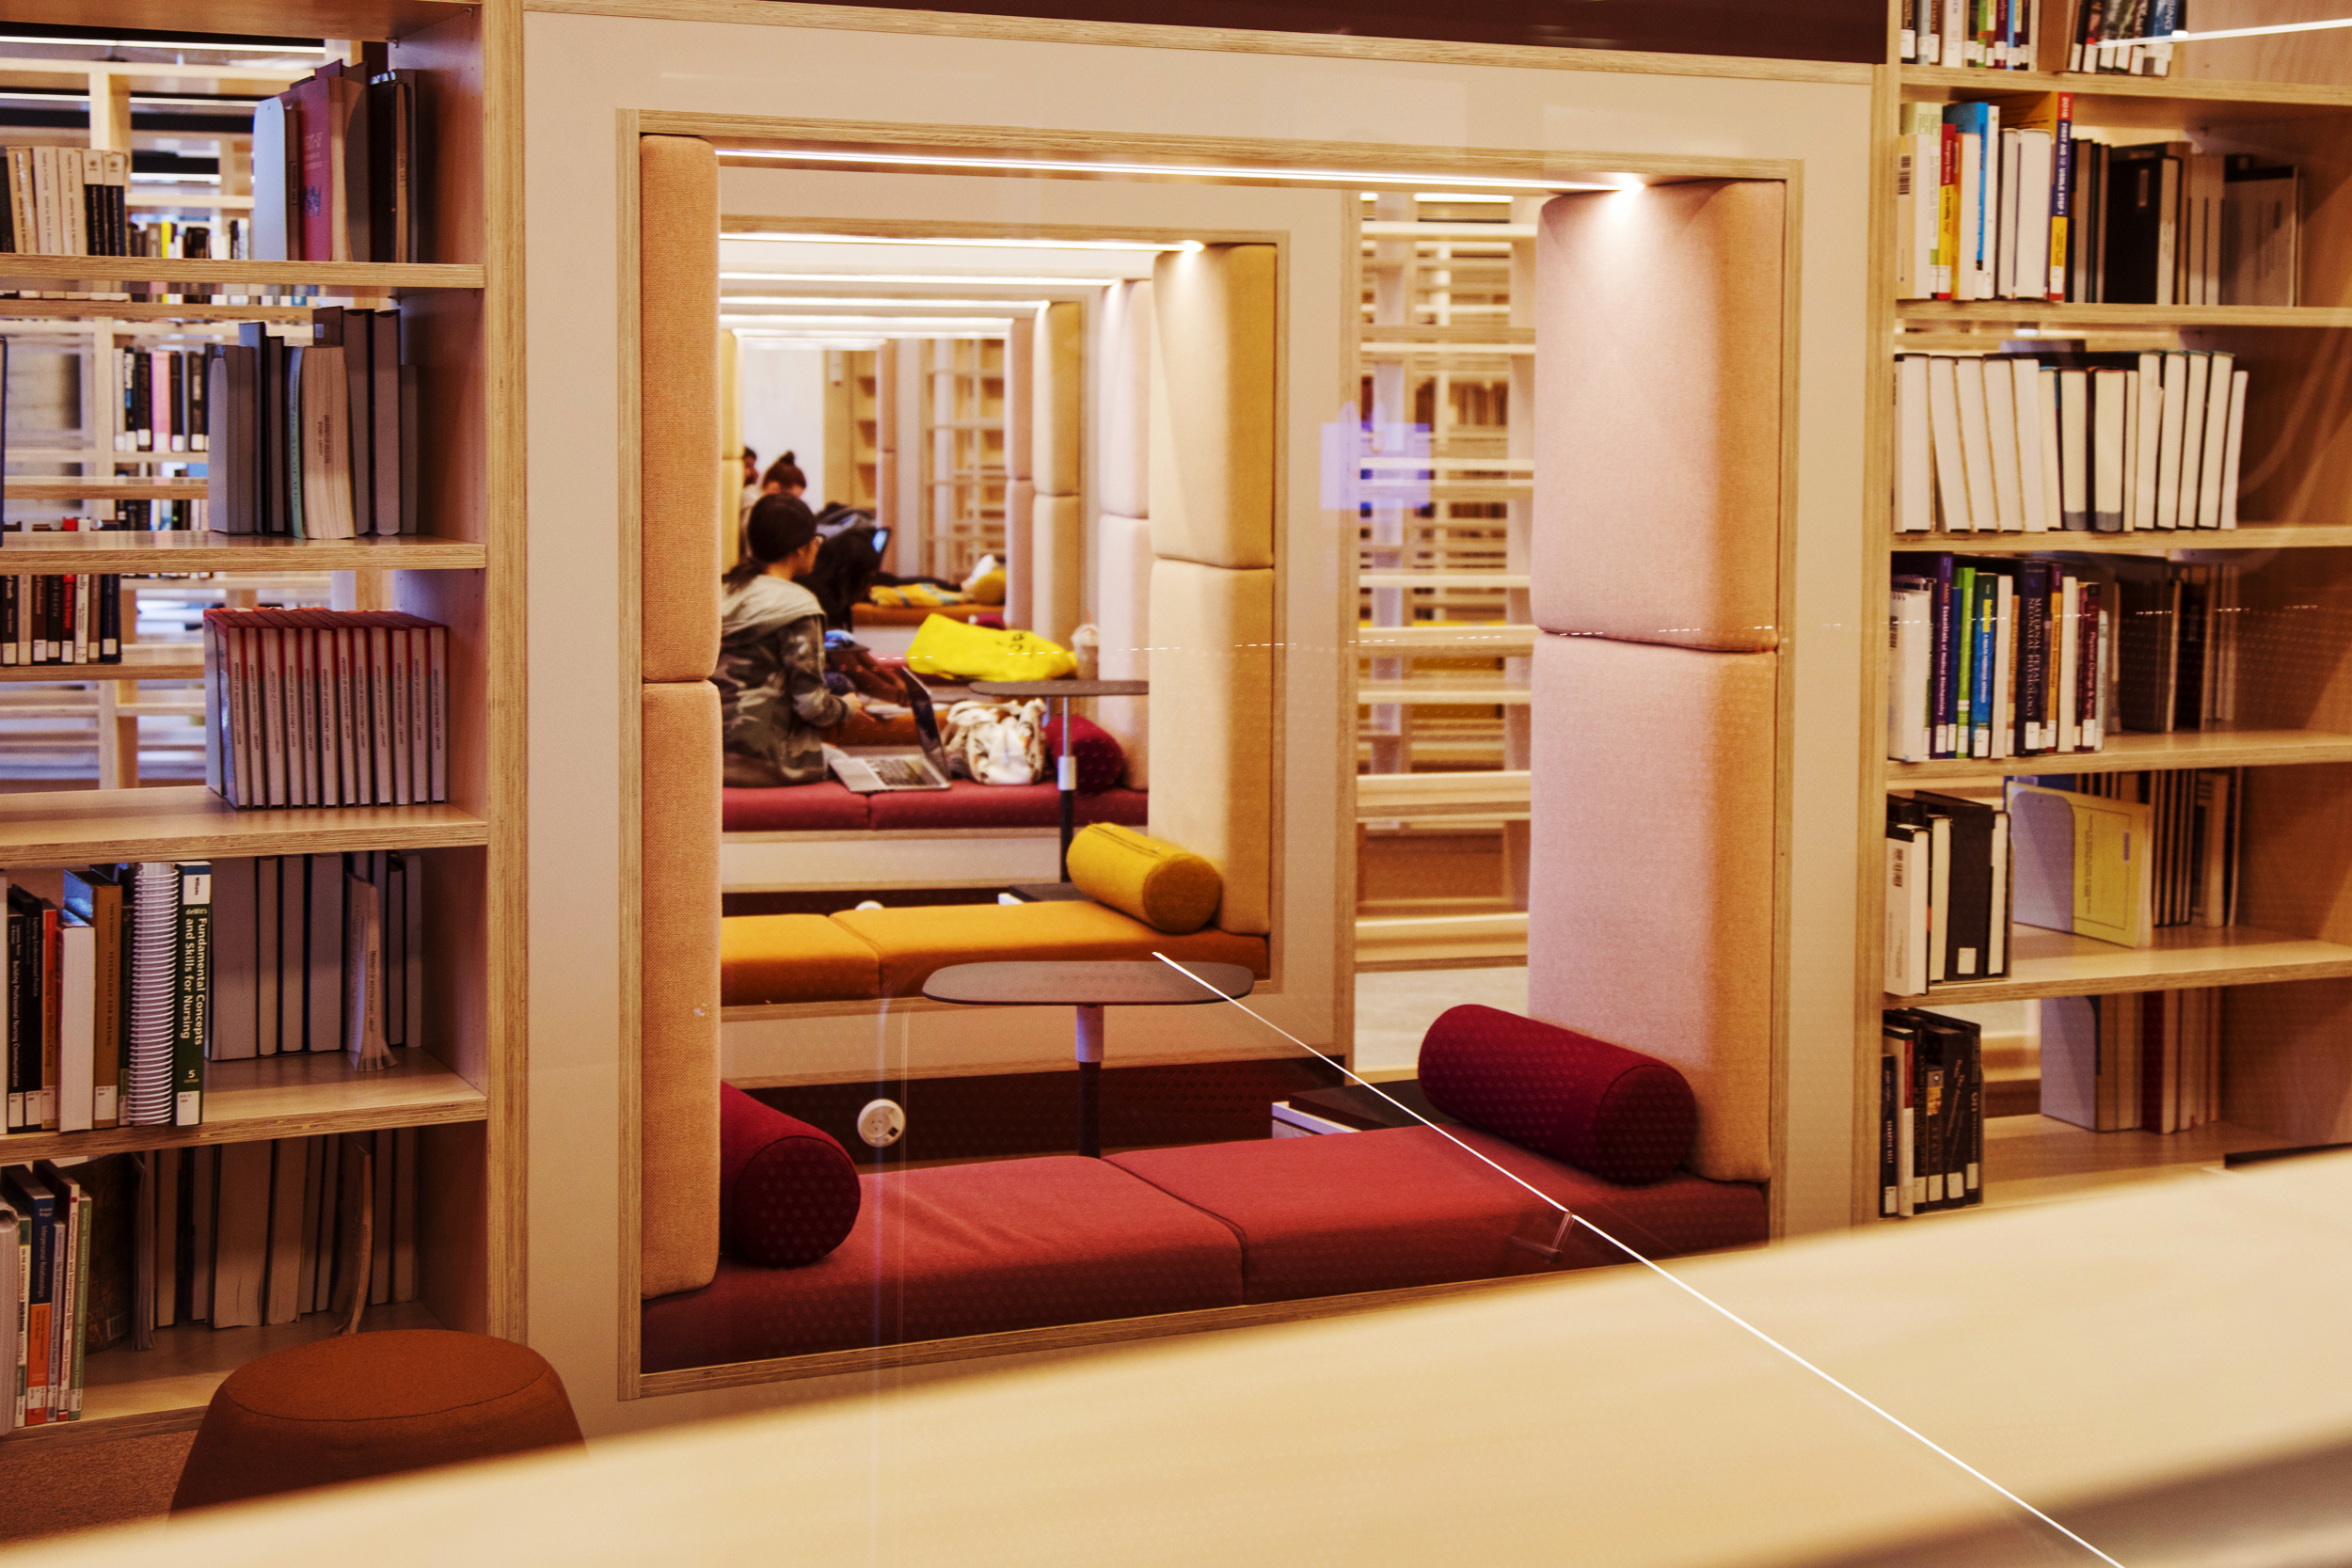 With a focus on quiet and silent study, our Liverpool Library offers a comfortable space for students which fosters academic learning supported by staff members, online resources and print items.